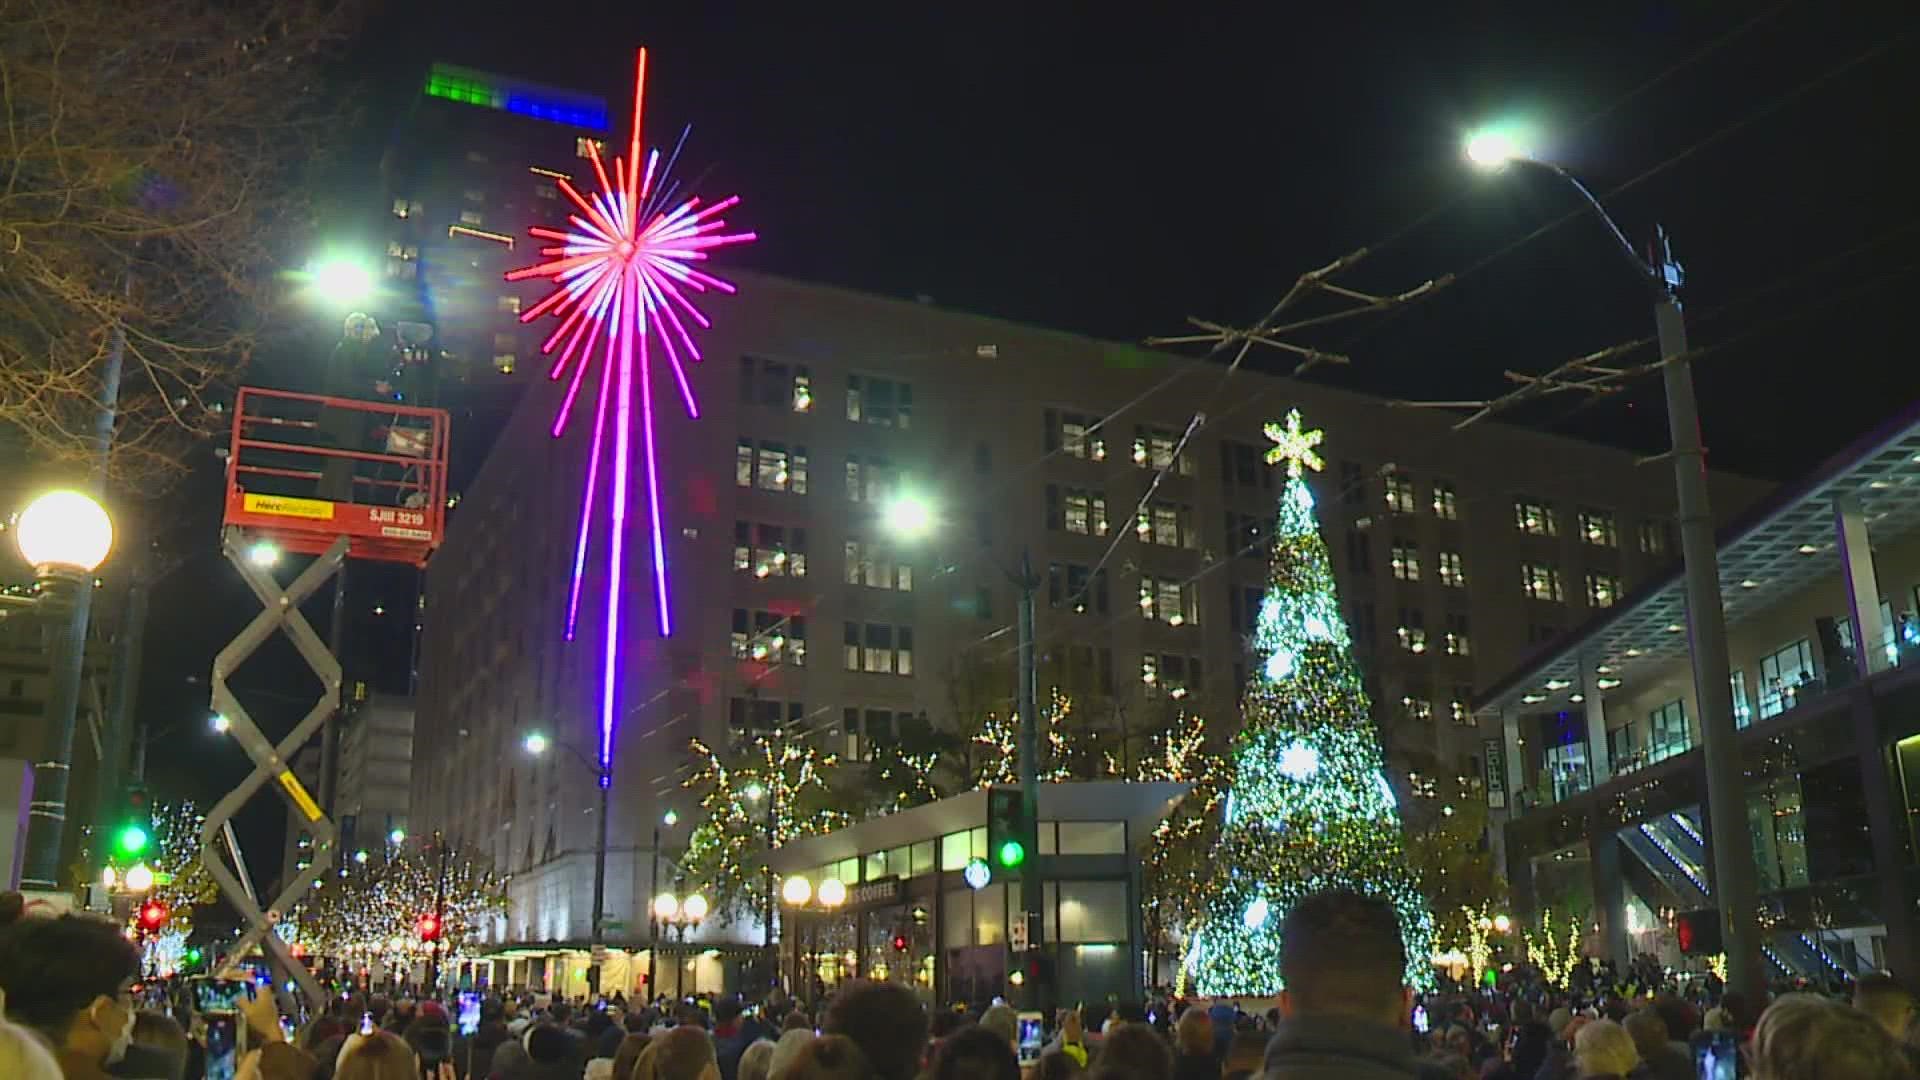 The annual tree lighting felt "almost normal" to some in attendance eager to kick off the holiday season.